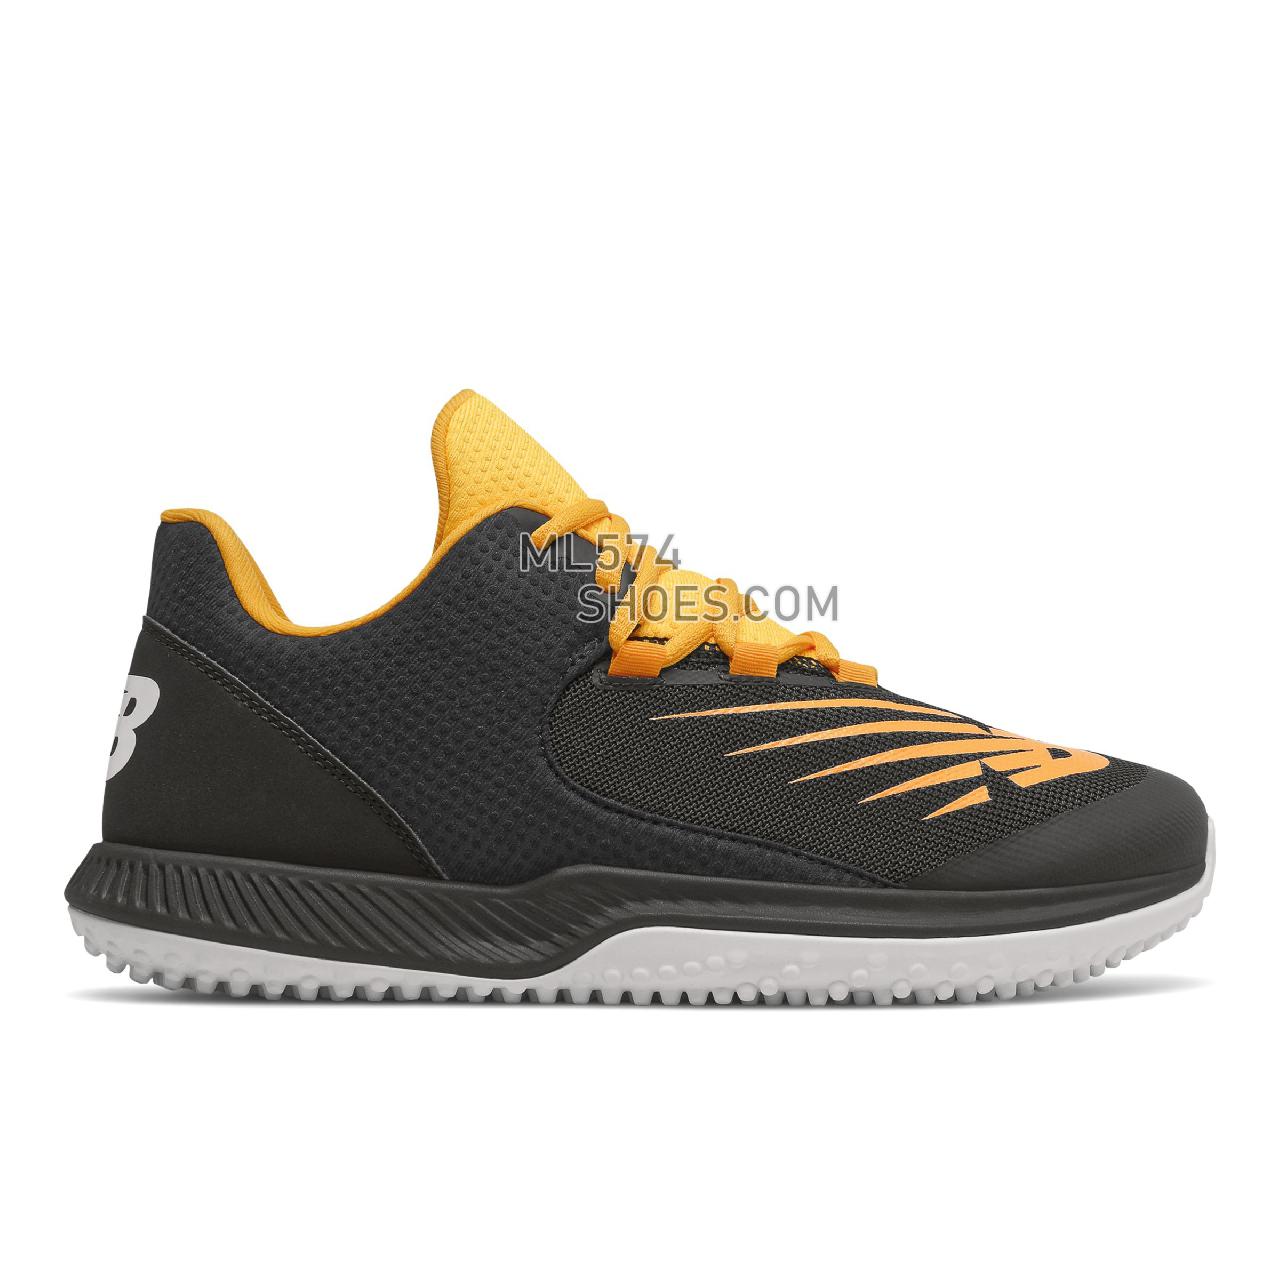 New Balance FuelCell 4040 v6 Turf Trainer - Men's Baseball Turf - Black with Yellow - T4040BY6